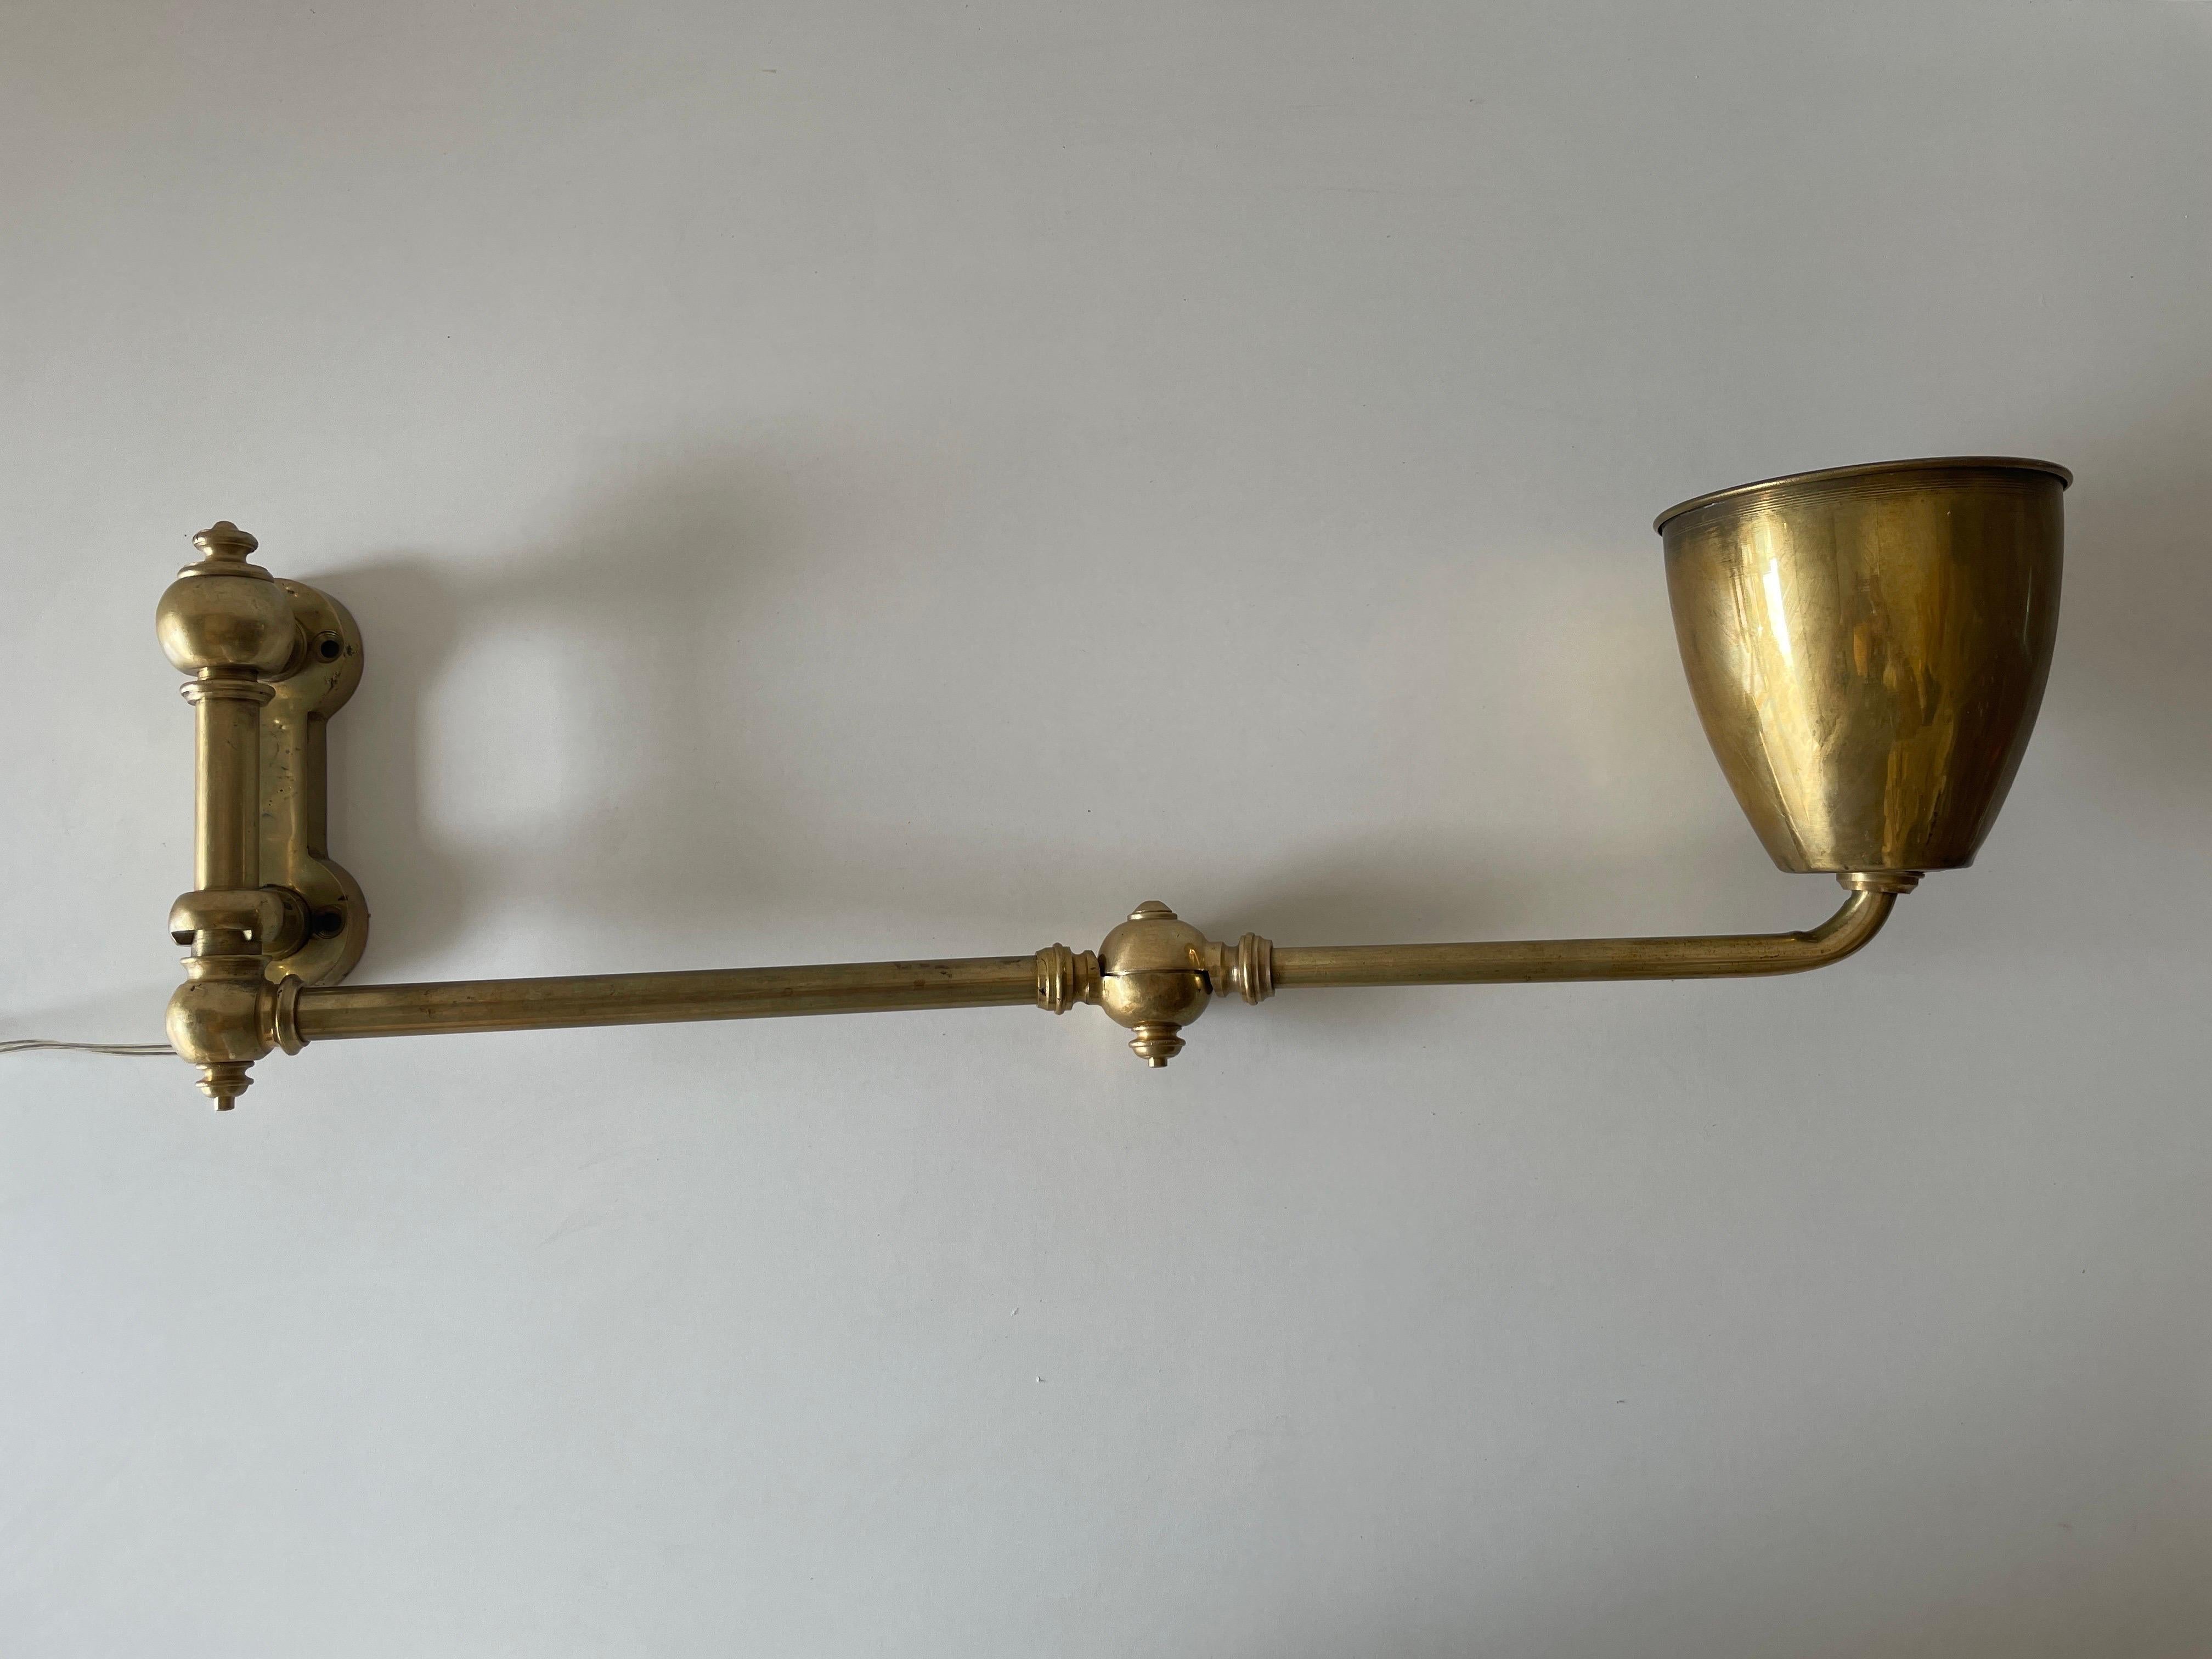 Full Brass Adjustable Head and Arm Industrial Task Wall Lamp, 1940s, Germany

Very nice high quality wall lamp.

Lamp is in very good vintage condition.

These lamps works with E27 standard light bulbs. 
Wired and suitable to use in all countries.